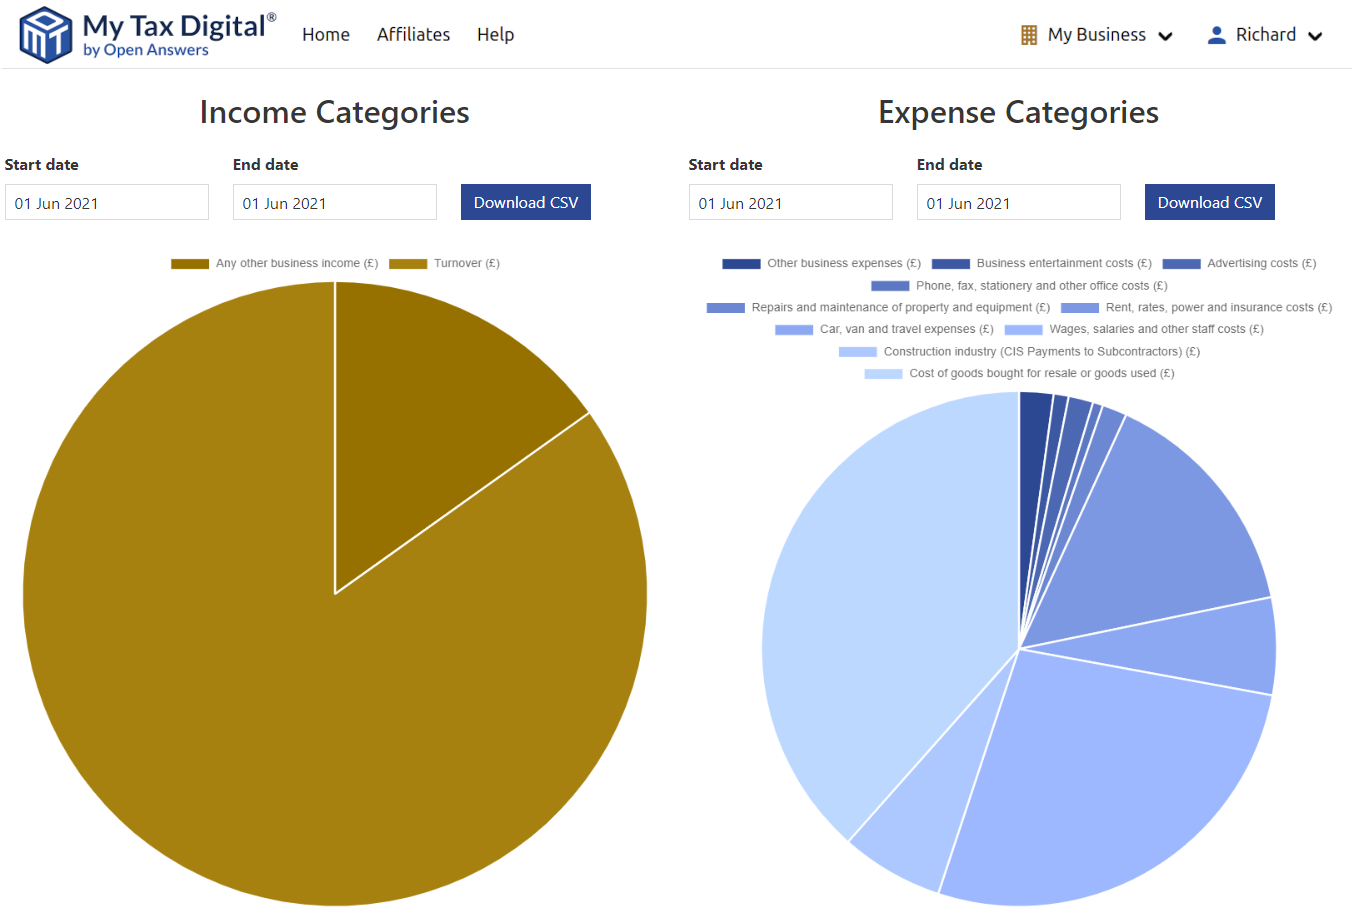 My Tax Digital Income & Expense Categories pie charts